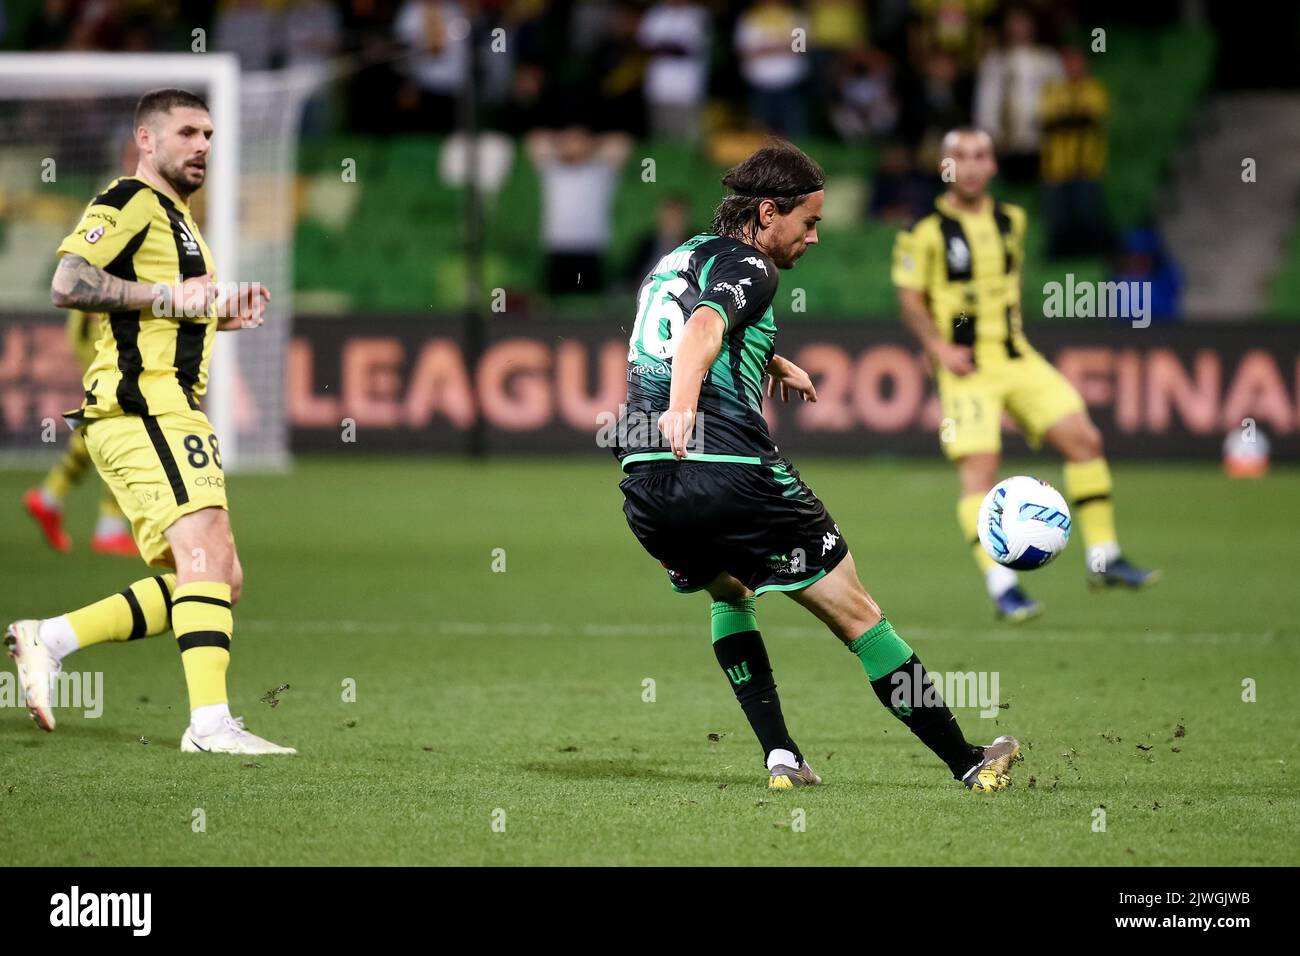 MELBOURNE, AUSTRALIA - MAY 14: Rene Krhin of Western United kicks the ball  during the A-League Elimination Final soccer match between Western United and Wellington Phoenix at AAMI Park on May 14, 2022 in Melbourne, Australia. Credit: Dave Hewison Stock Photo